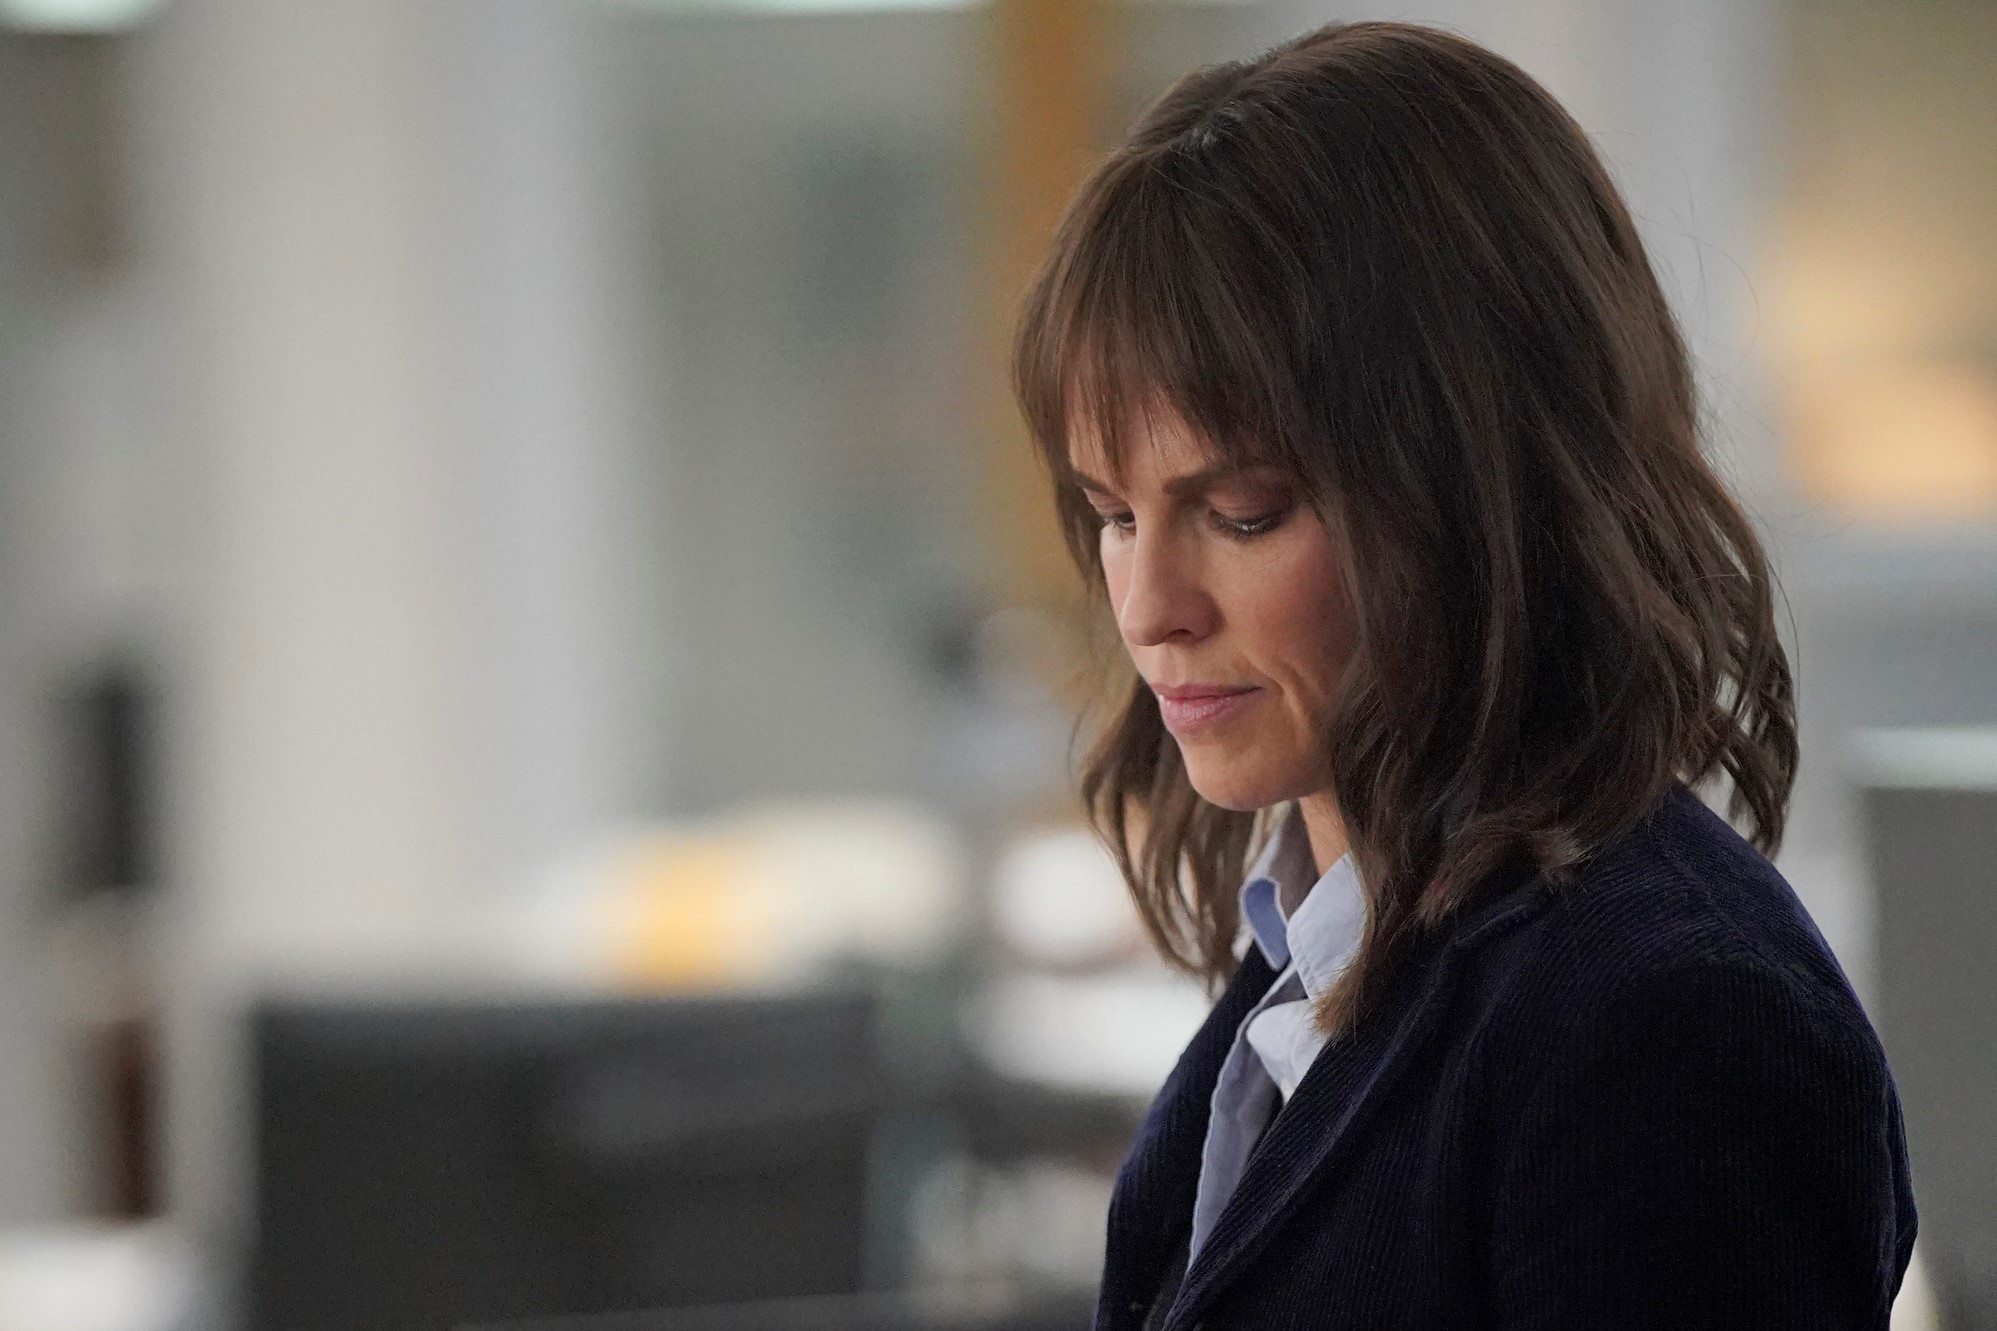 Hilary Swank stars as Eileen Fitzgerald in 'Alaska Daily' Episode 6 on ABC, and wears a black coat over a light blue button-up shirt in the photo.